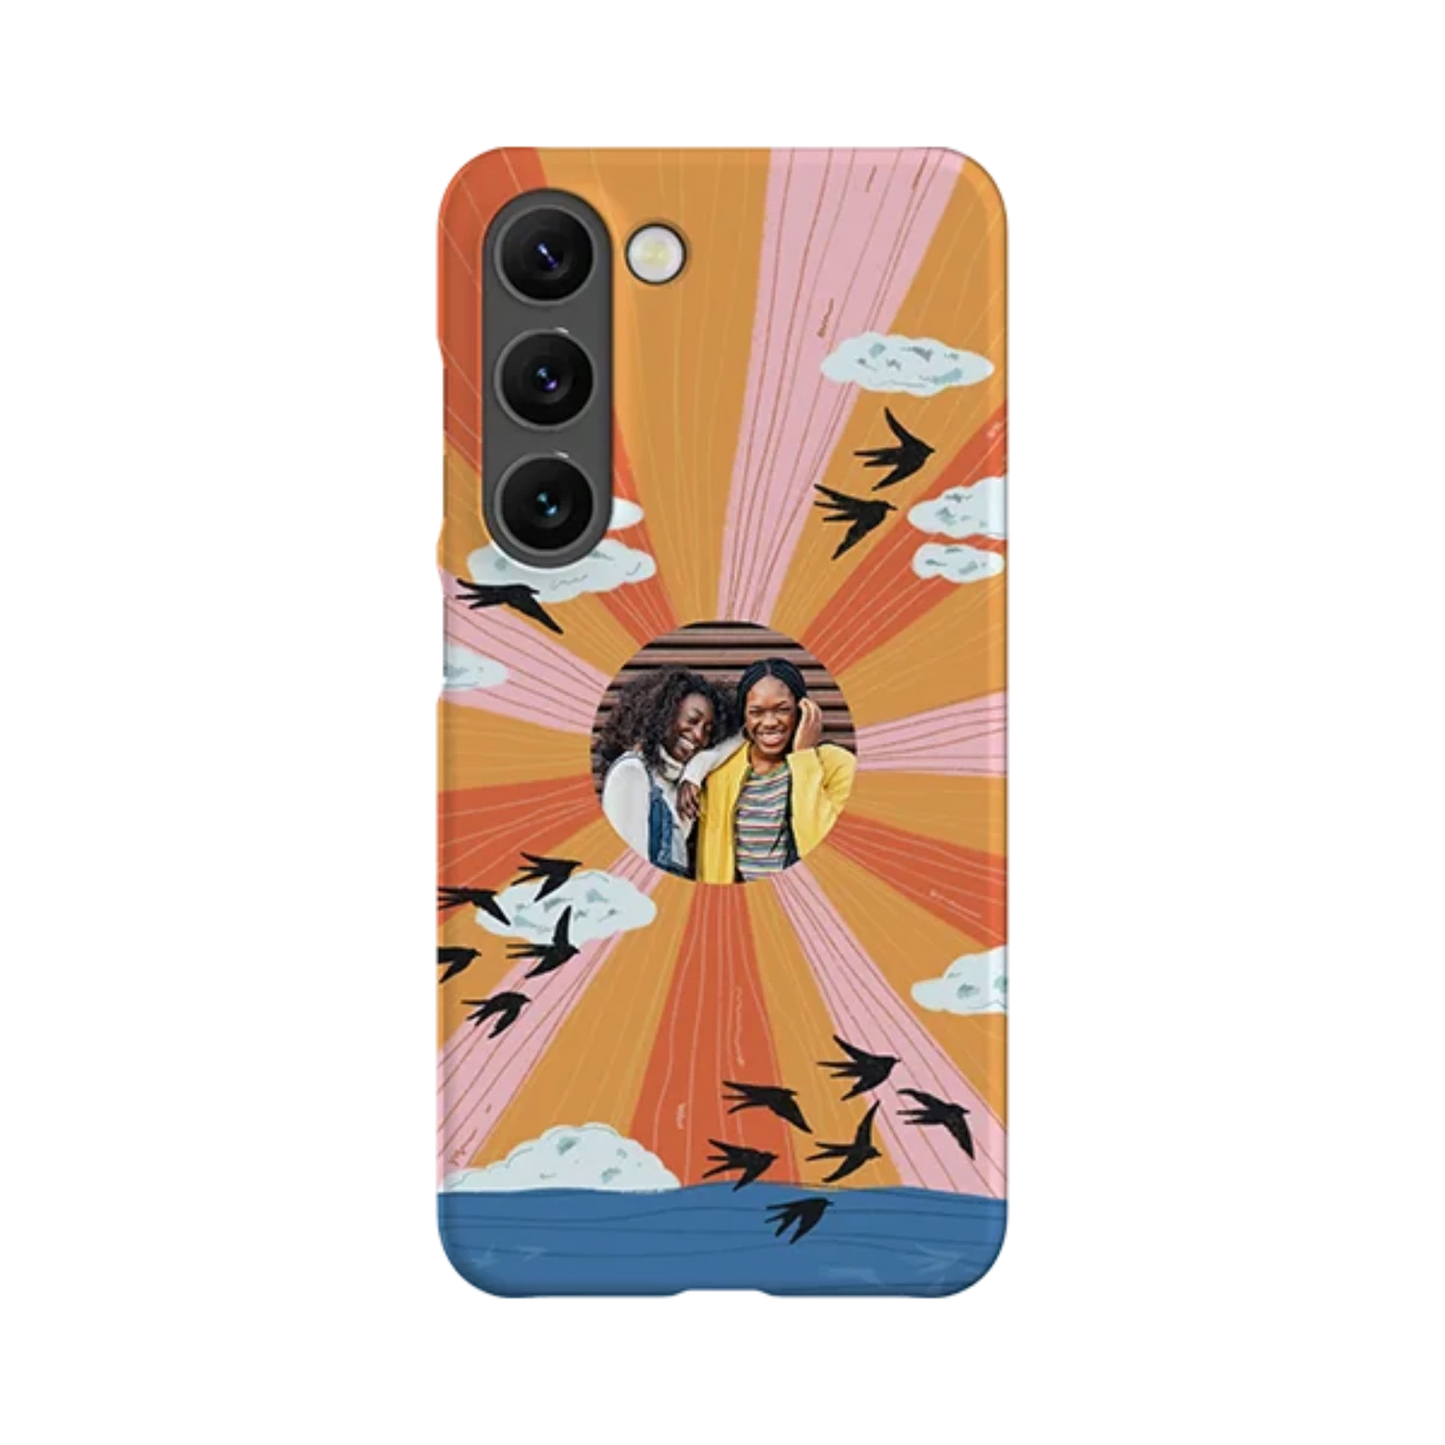 Sunset Light - Personalised Galaxy S Case